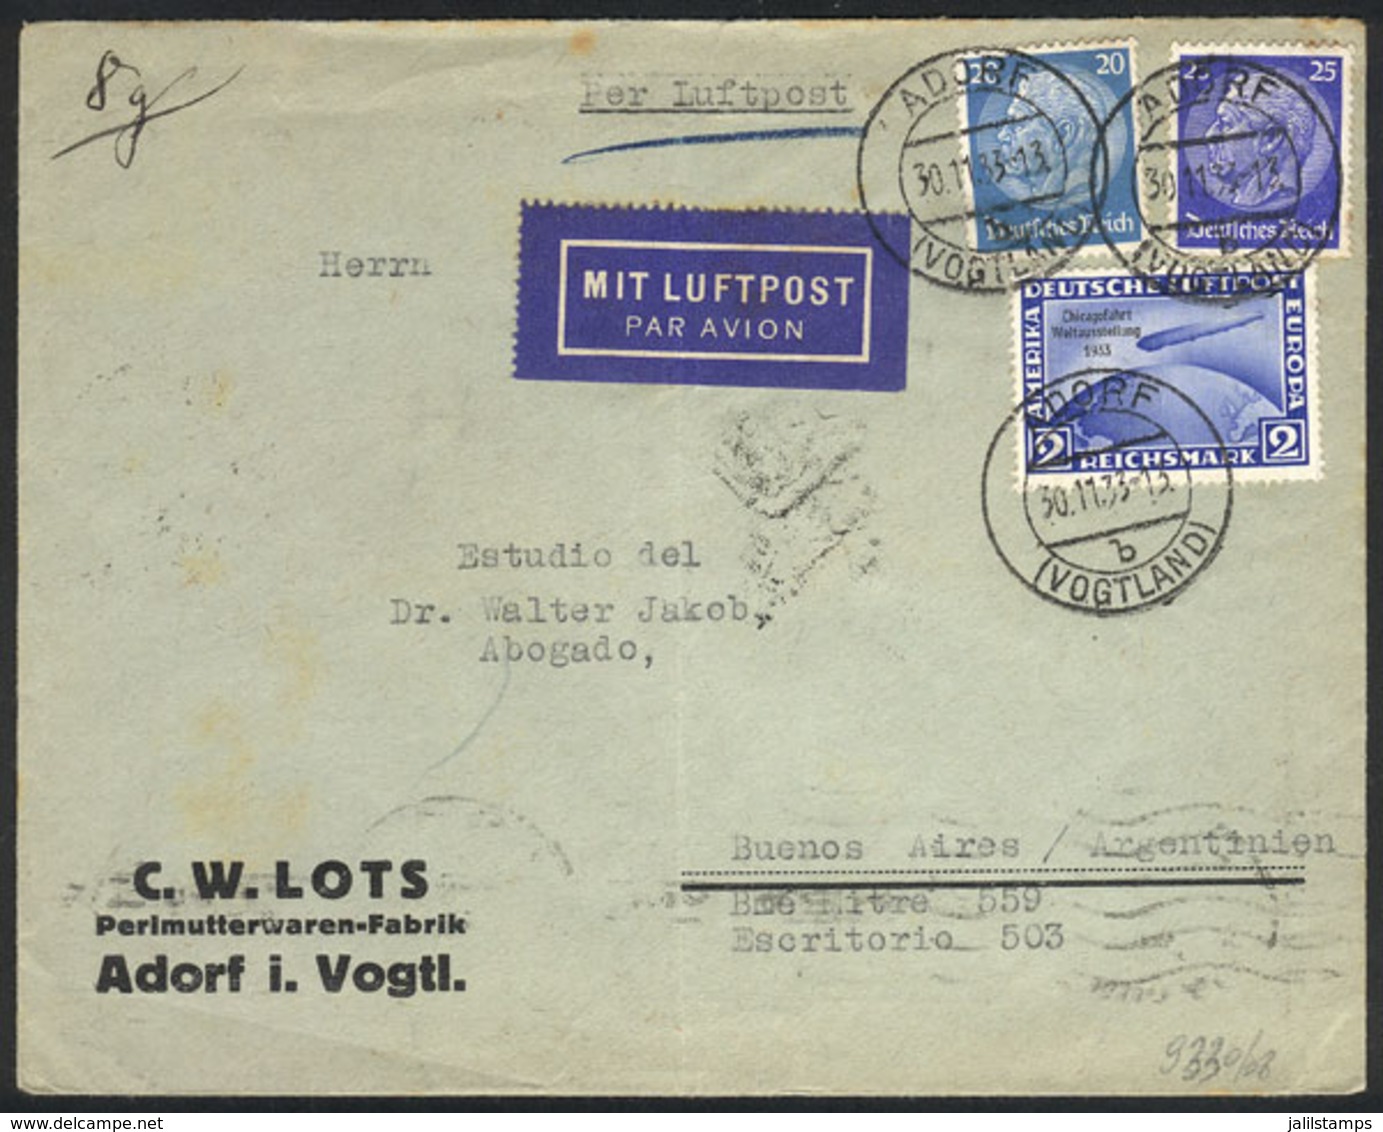 GERMANY: Airmail Cover Franked By Sc.C44 + Other Values (value US$275 On Cover), Sent From Adorf To Buenos Aires On 30/N - Prephilately